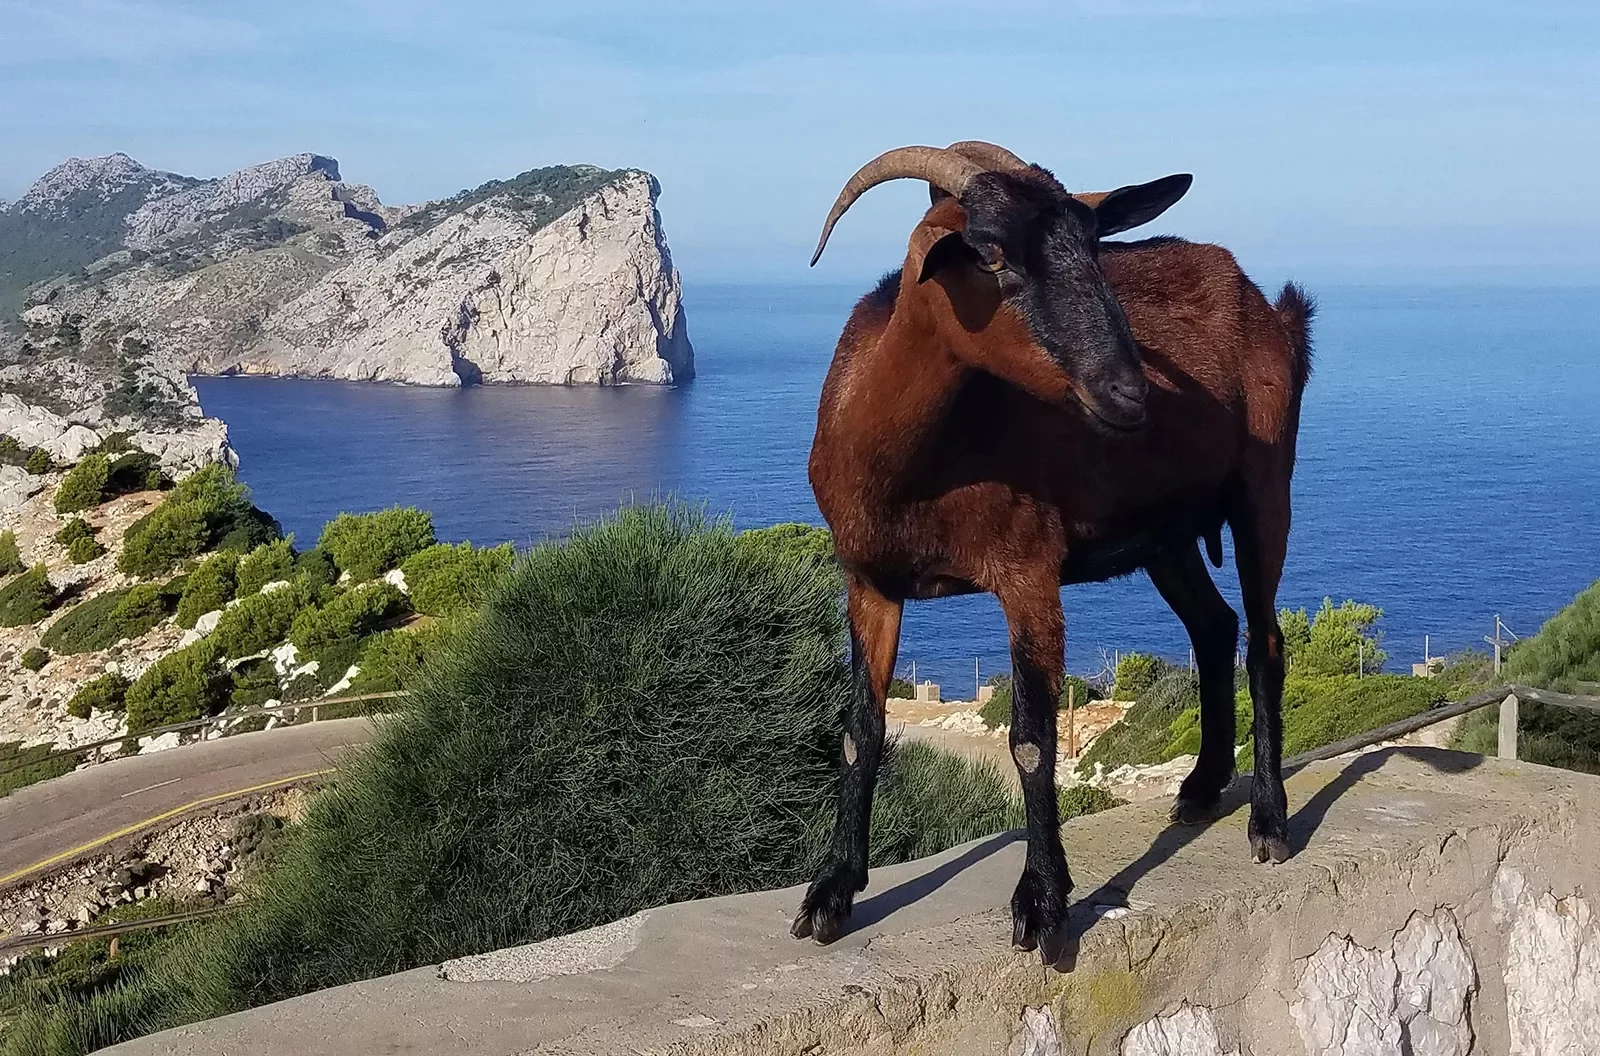 Ibex goat perched on a hill in Mallorca.